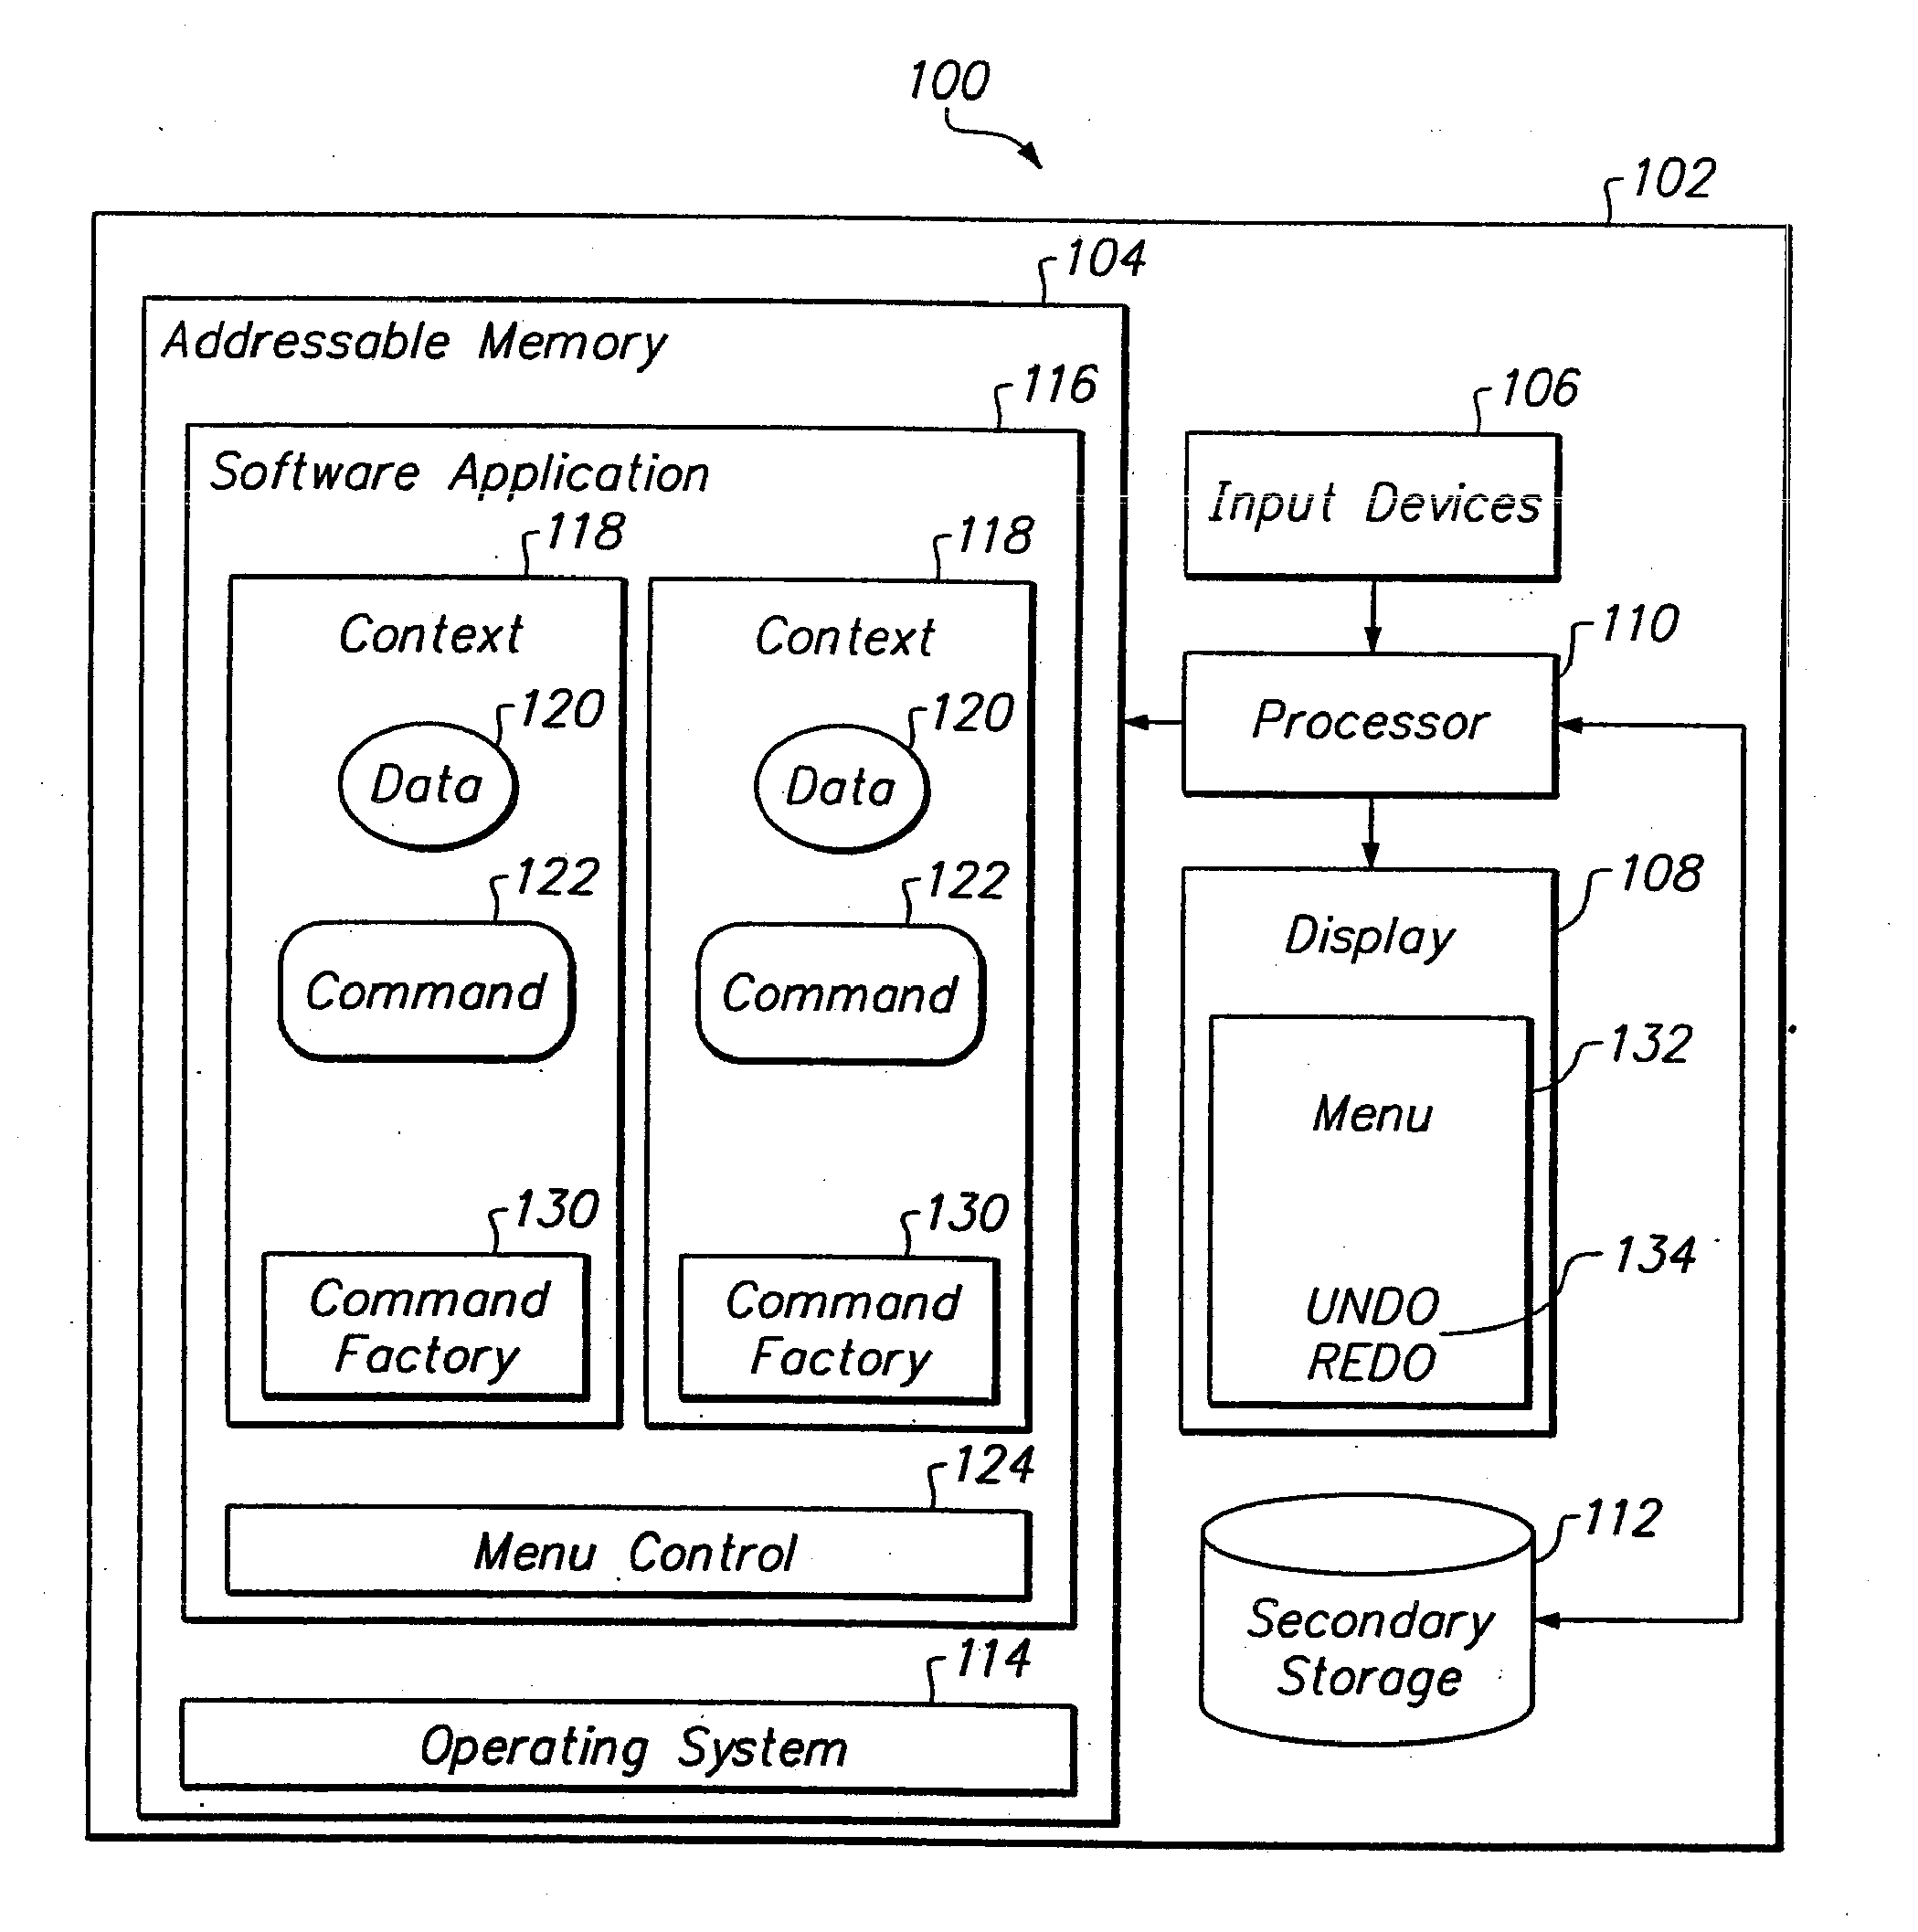 Method and system for synchronous operation of linked command objects